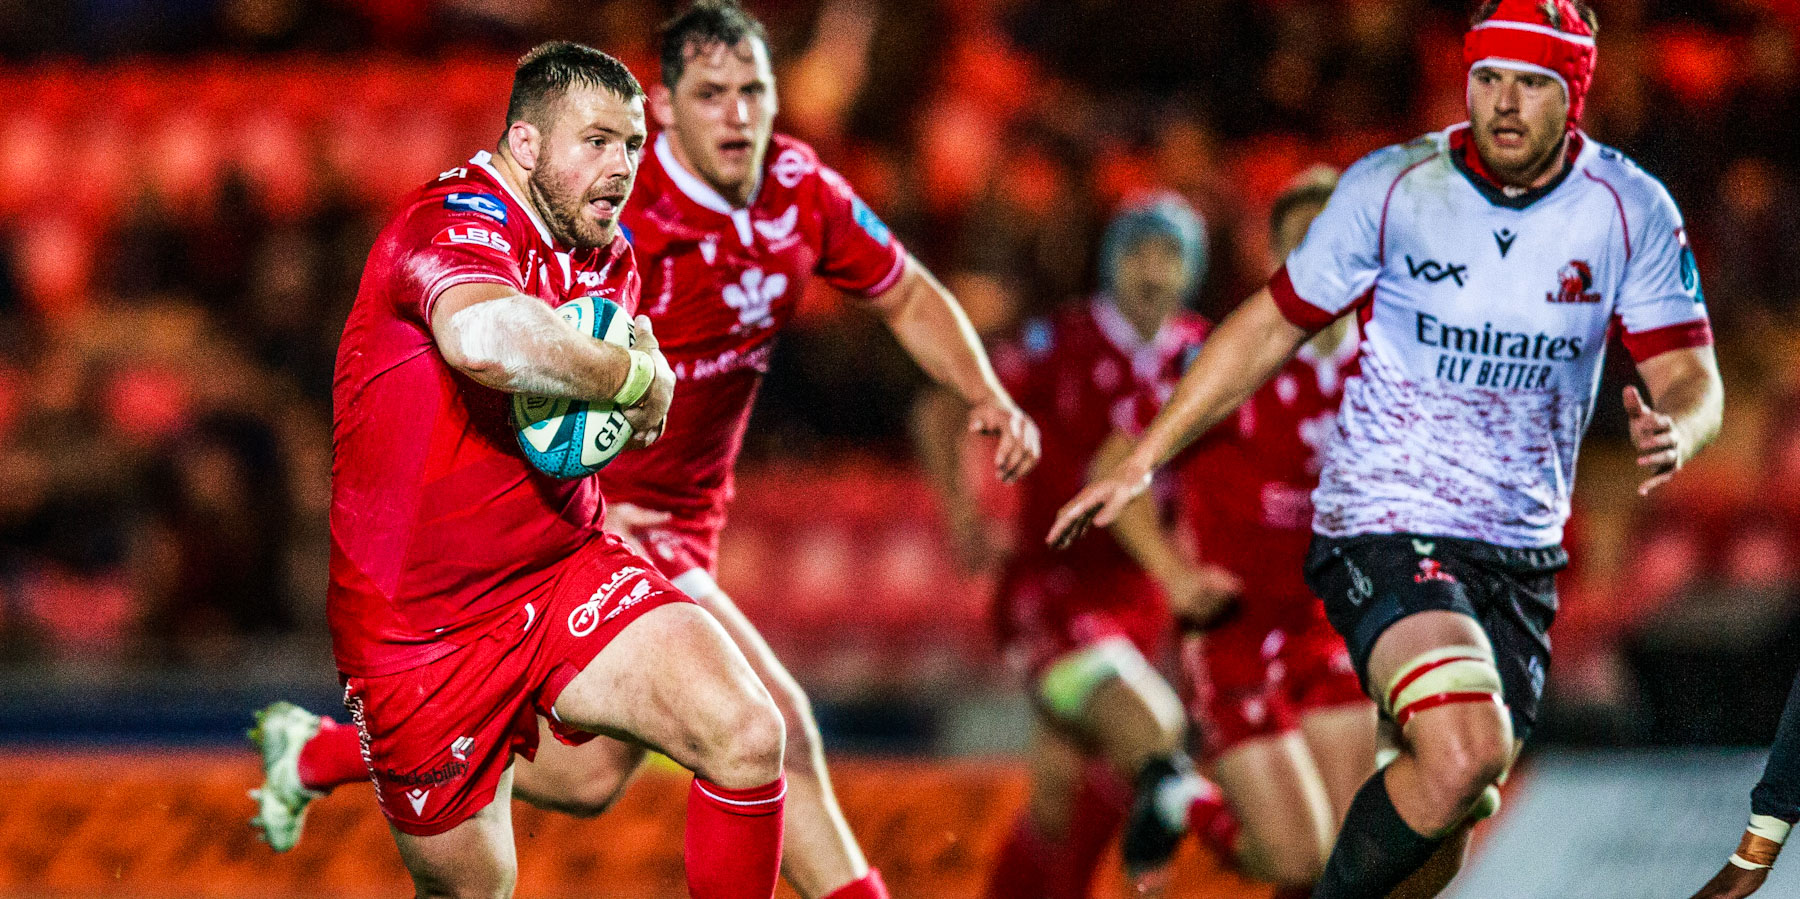 Rob Evans on the attack against the Emirates Lions.